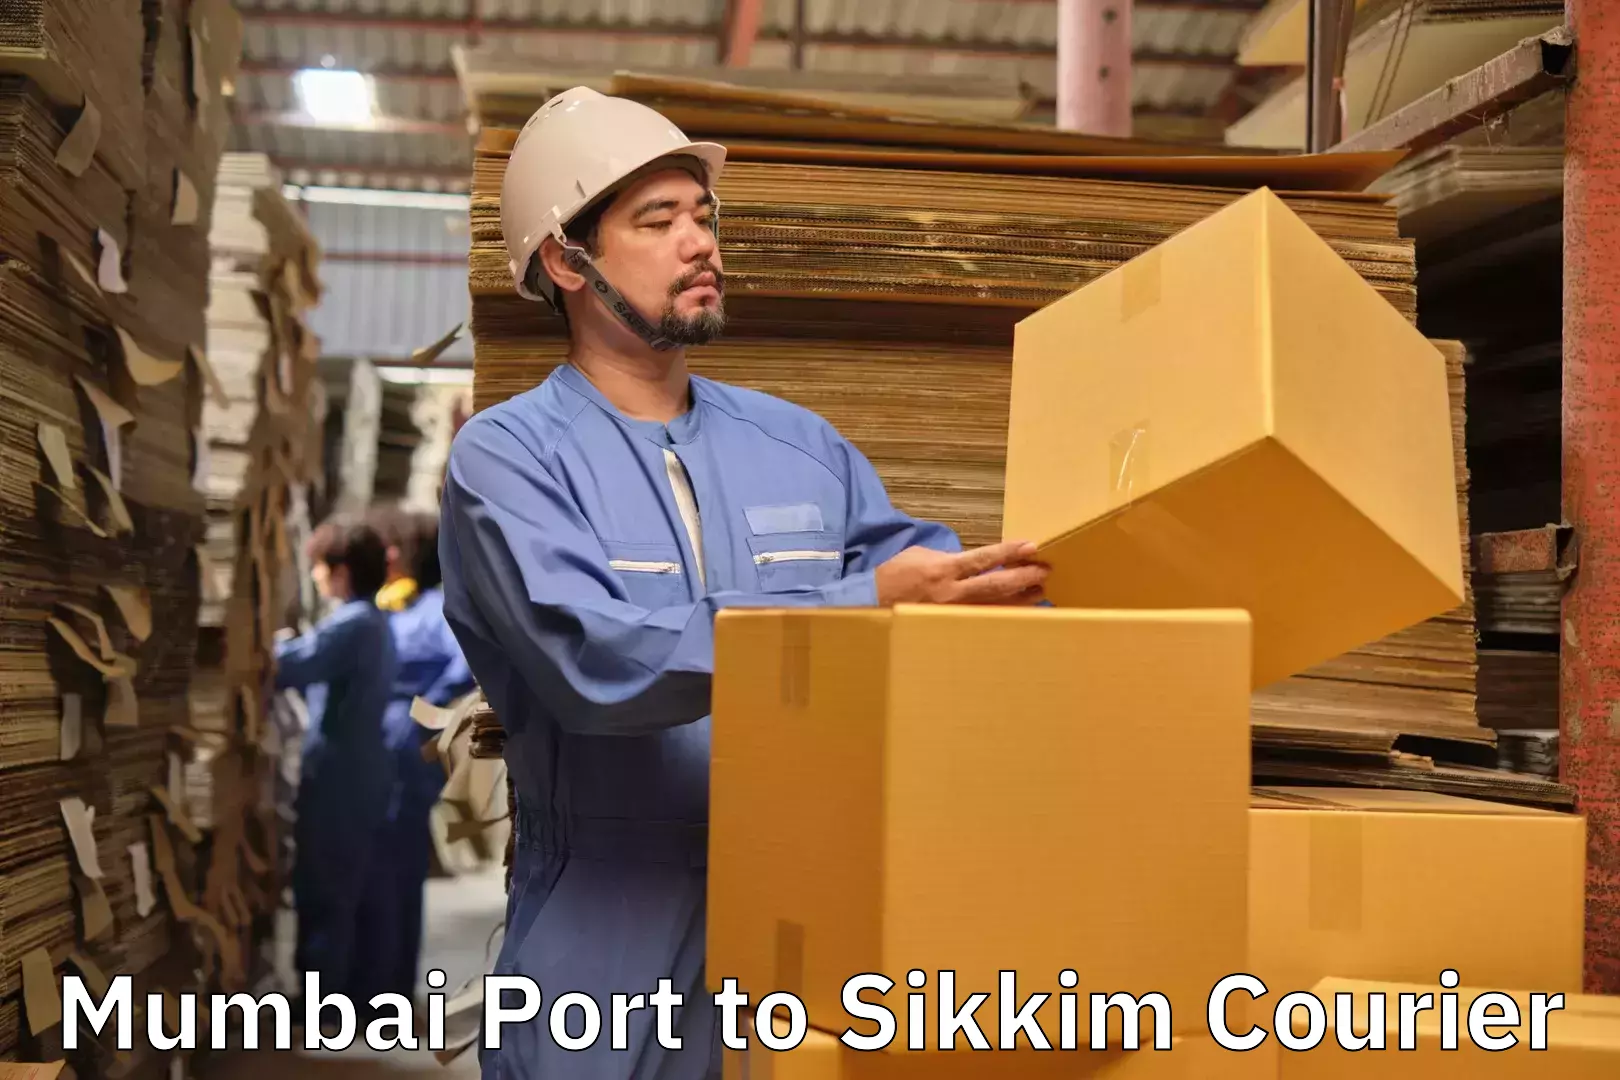 Luggage delivery app Mumbai Port to North Sikkim